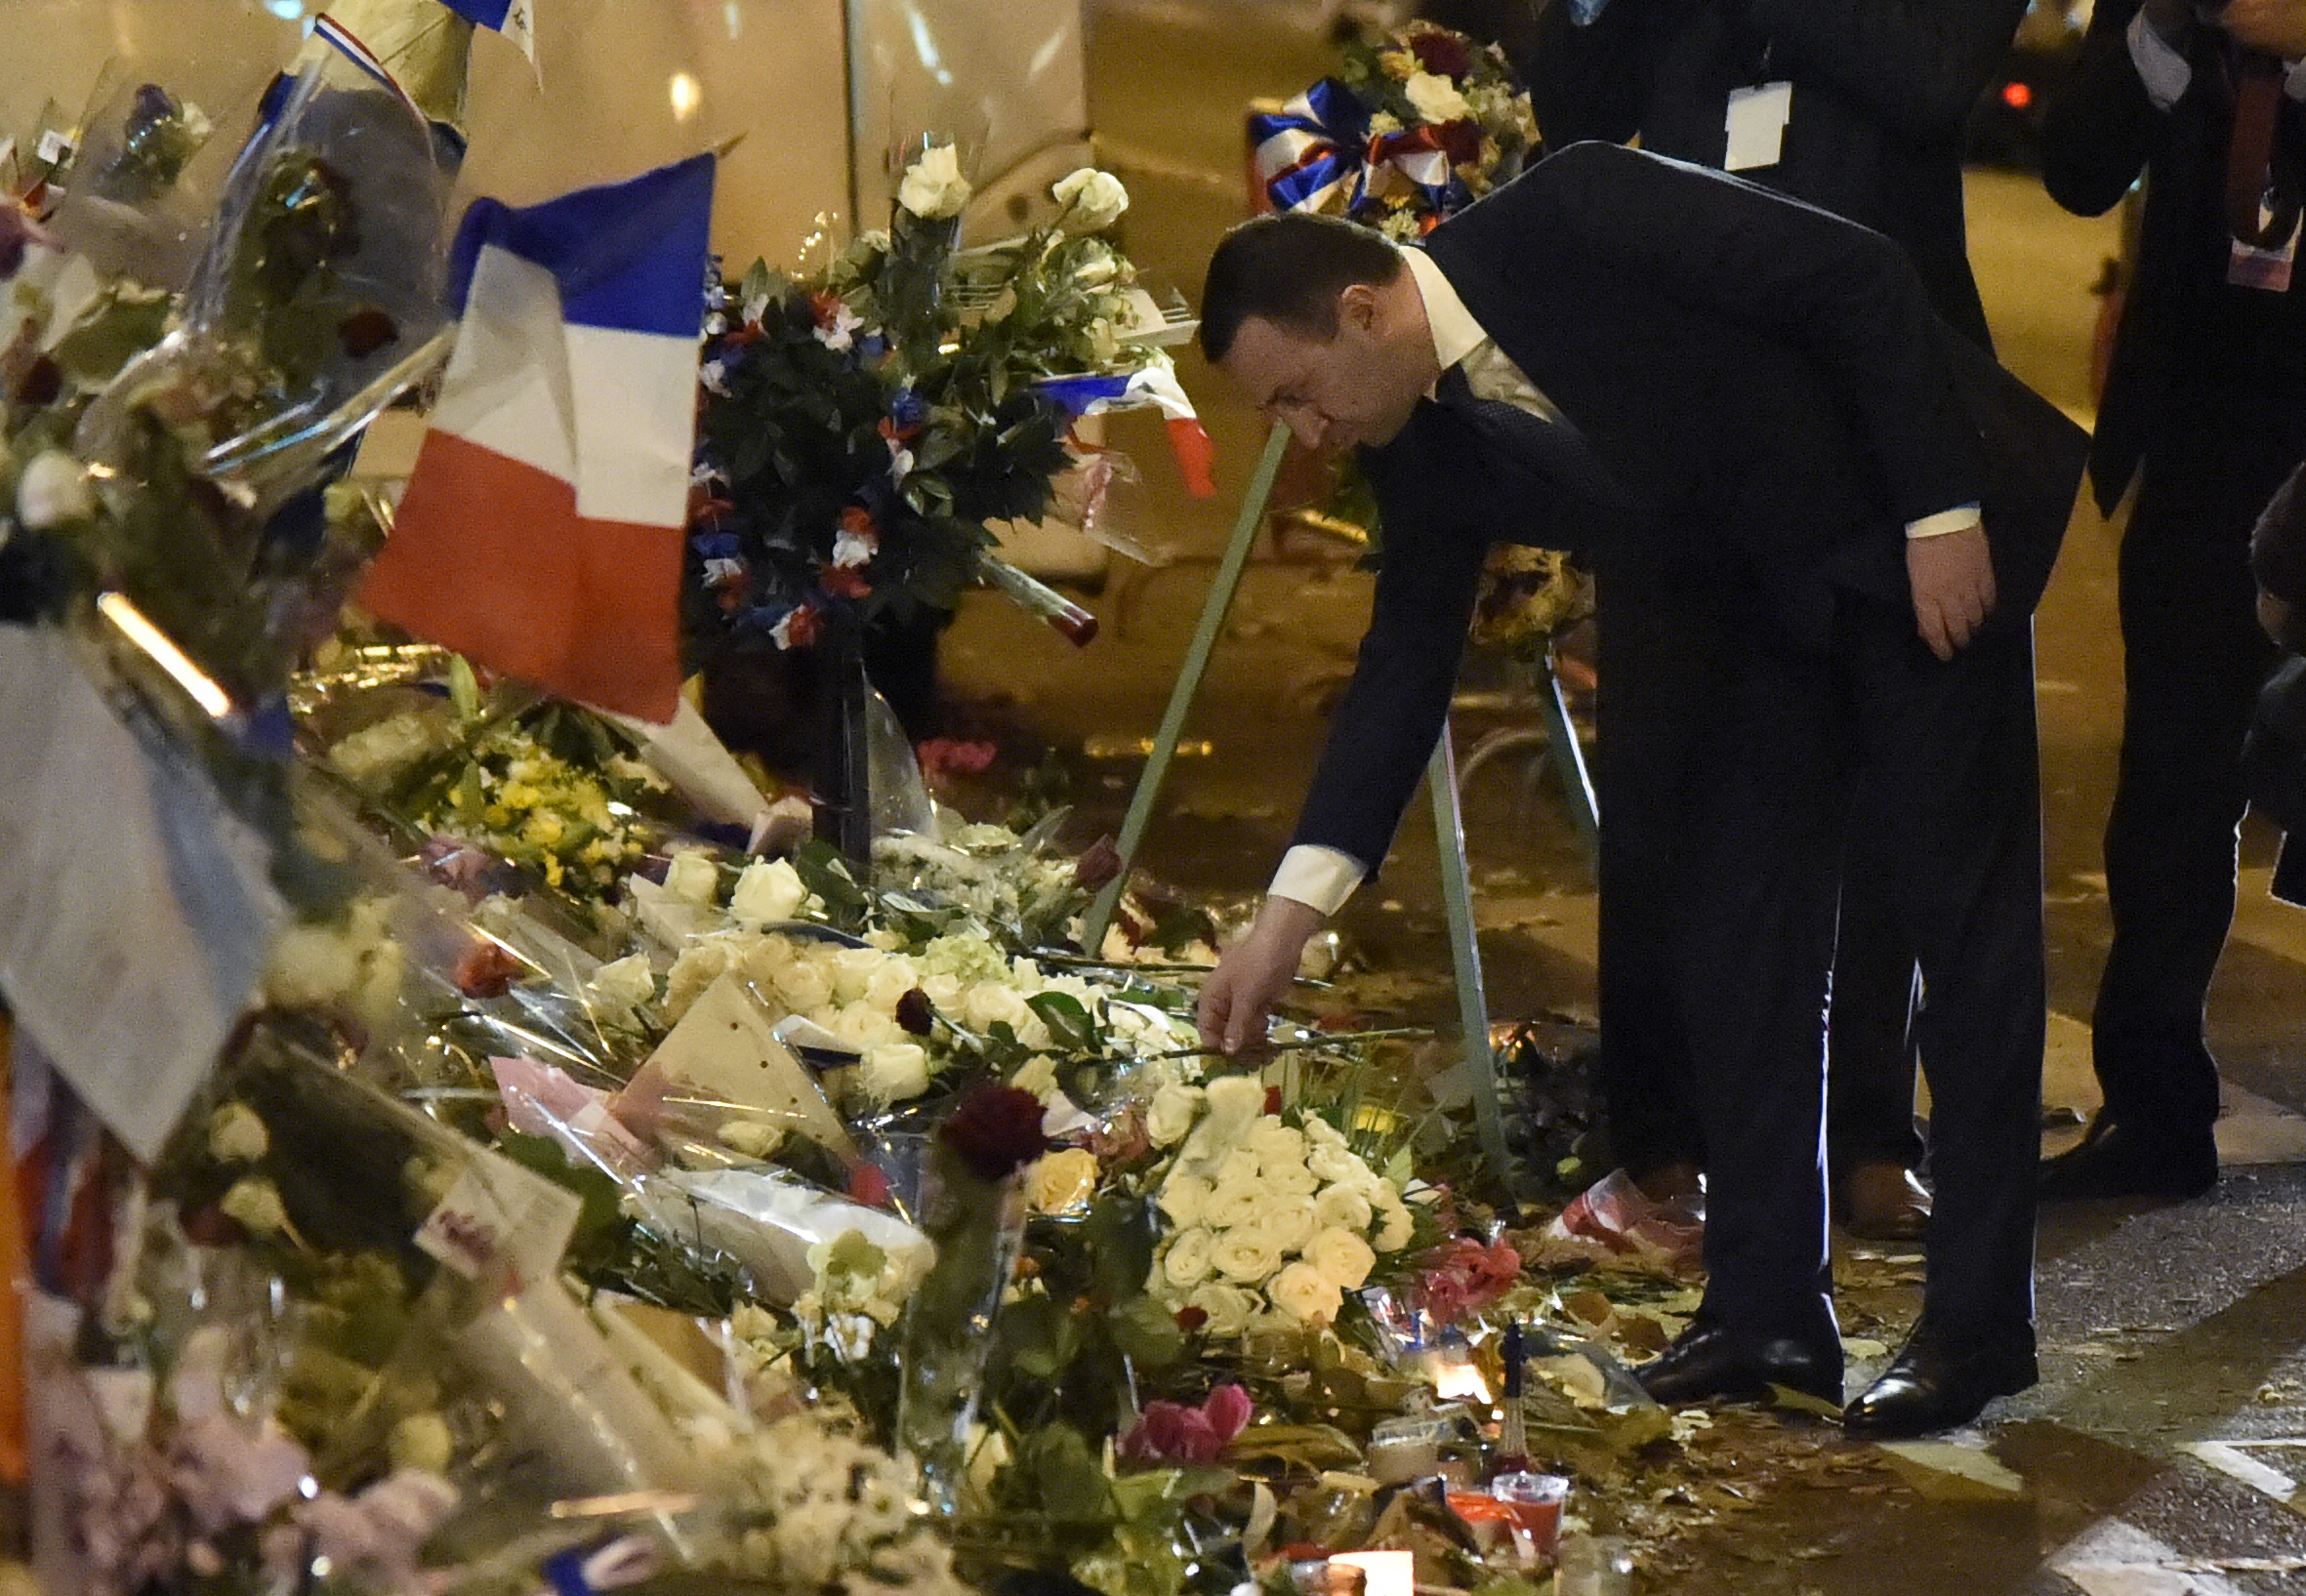 Georgia's Prime Minister Irakli Garibashvili pays tribute to the victims of the November 13 terrorist attacks at a makeshift memorial in front of the Bataclan music hall in Paris, on November 30, 2015.